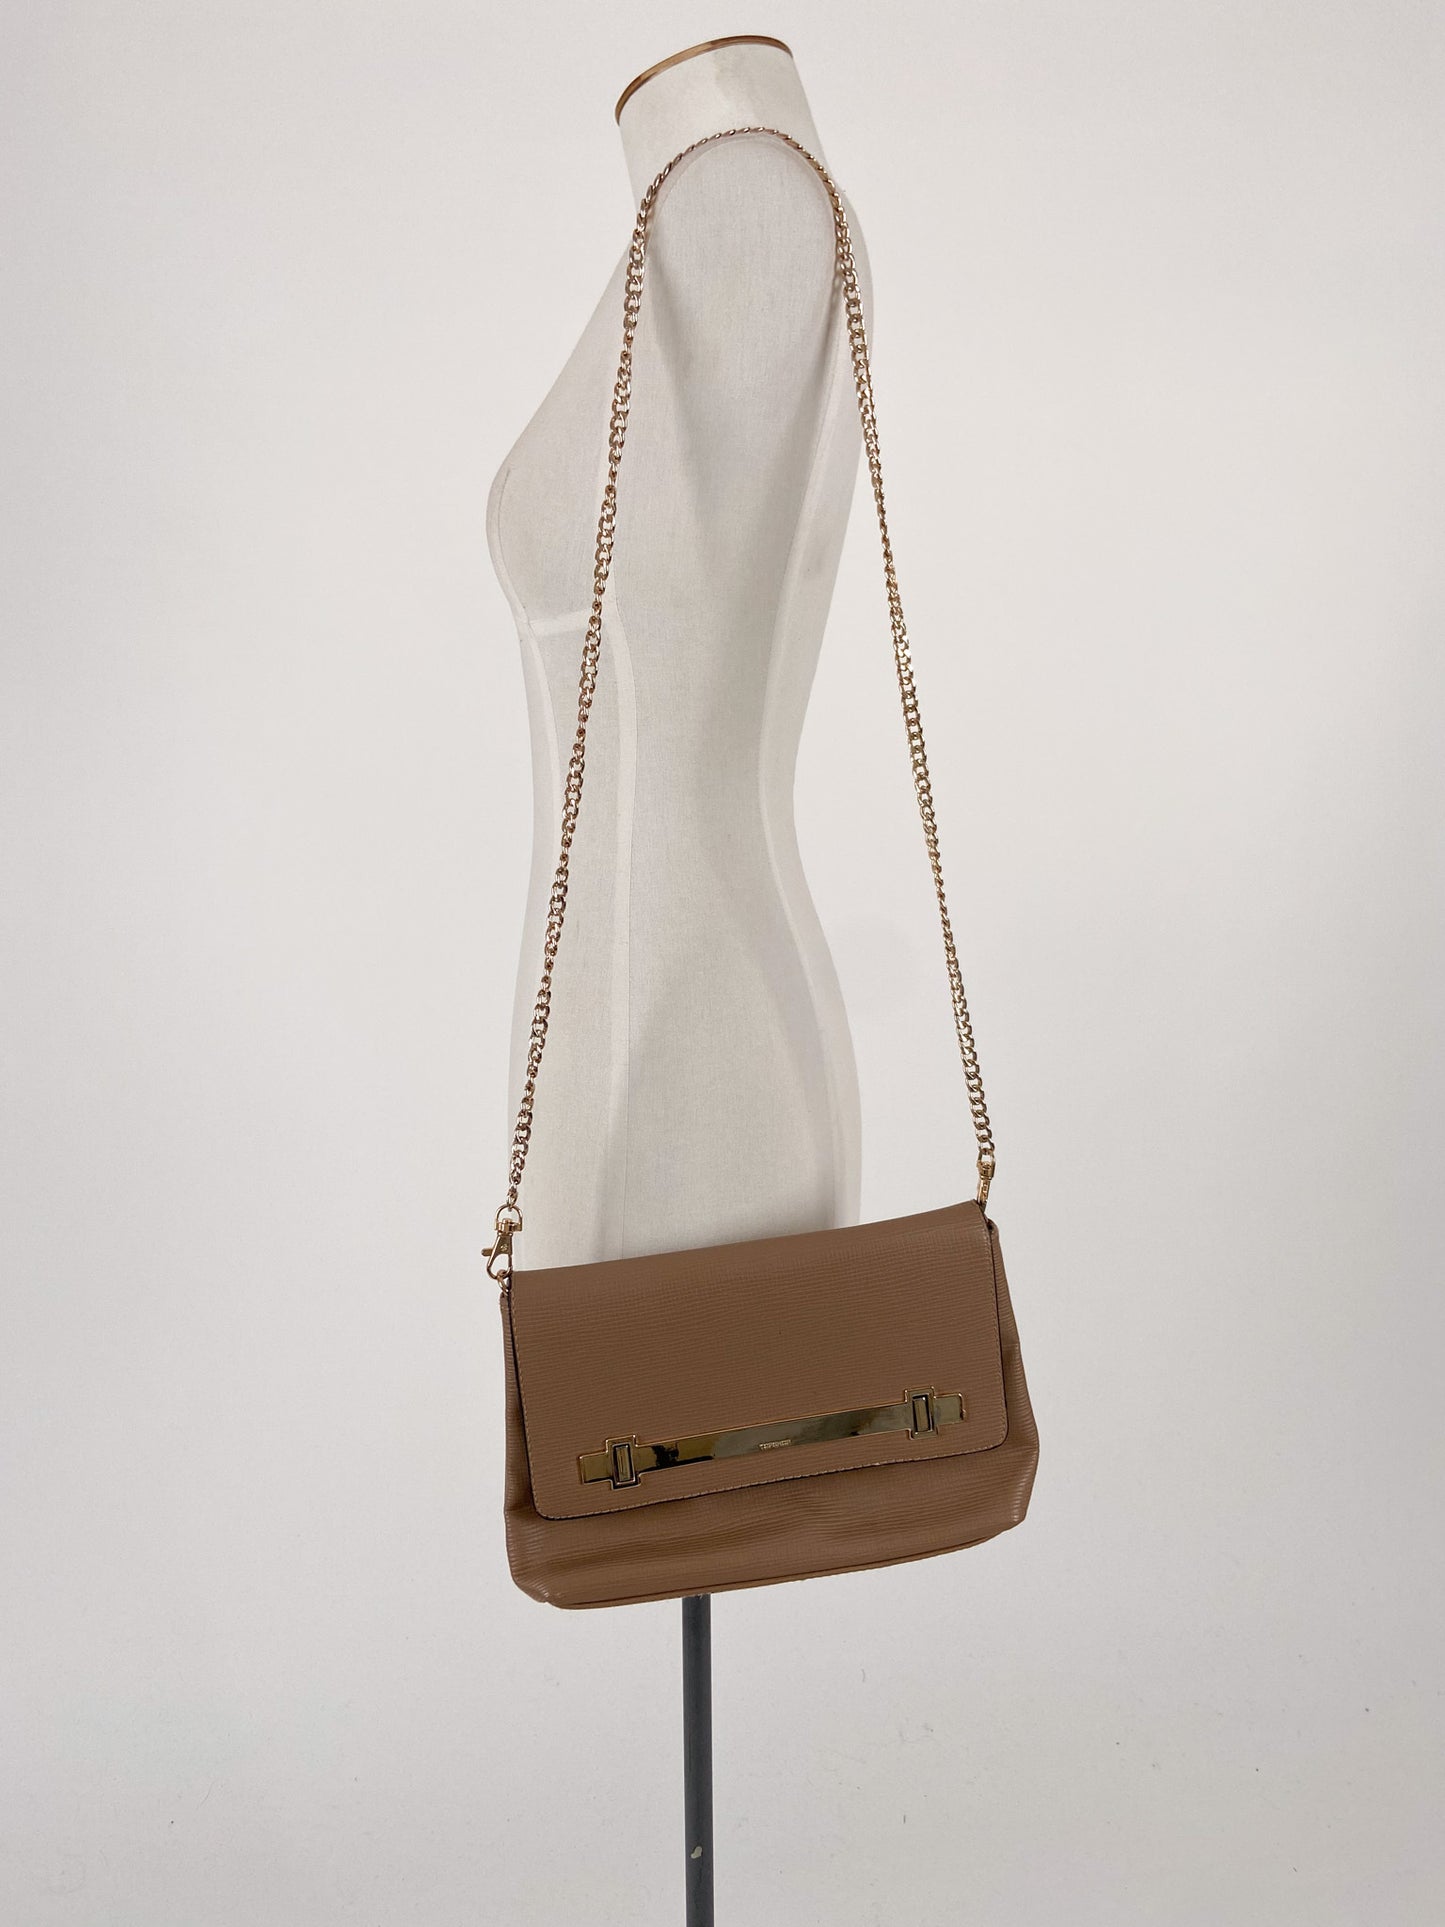 Topshop | Beige Accessory | Size OS